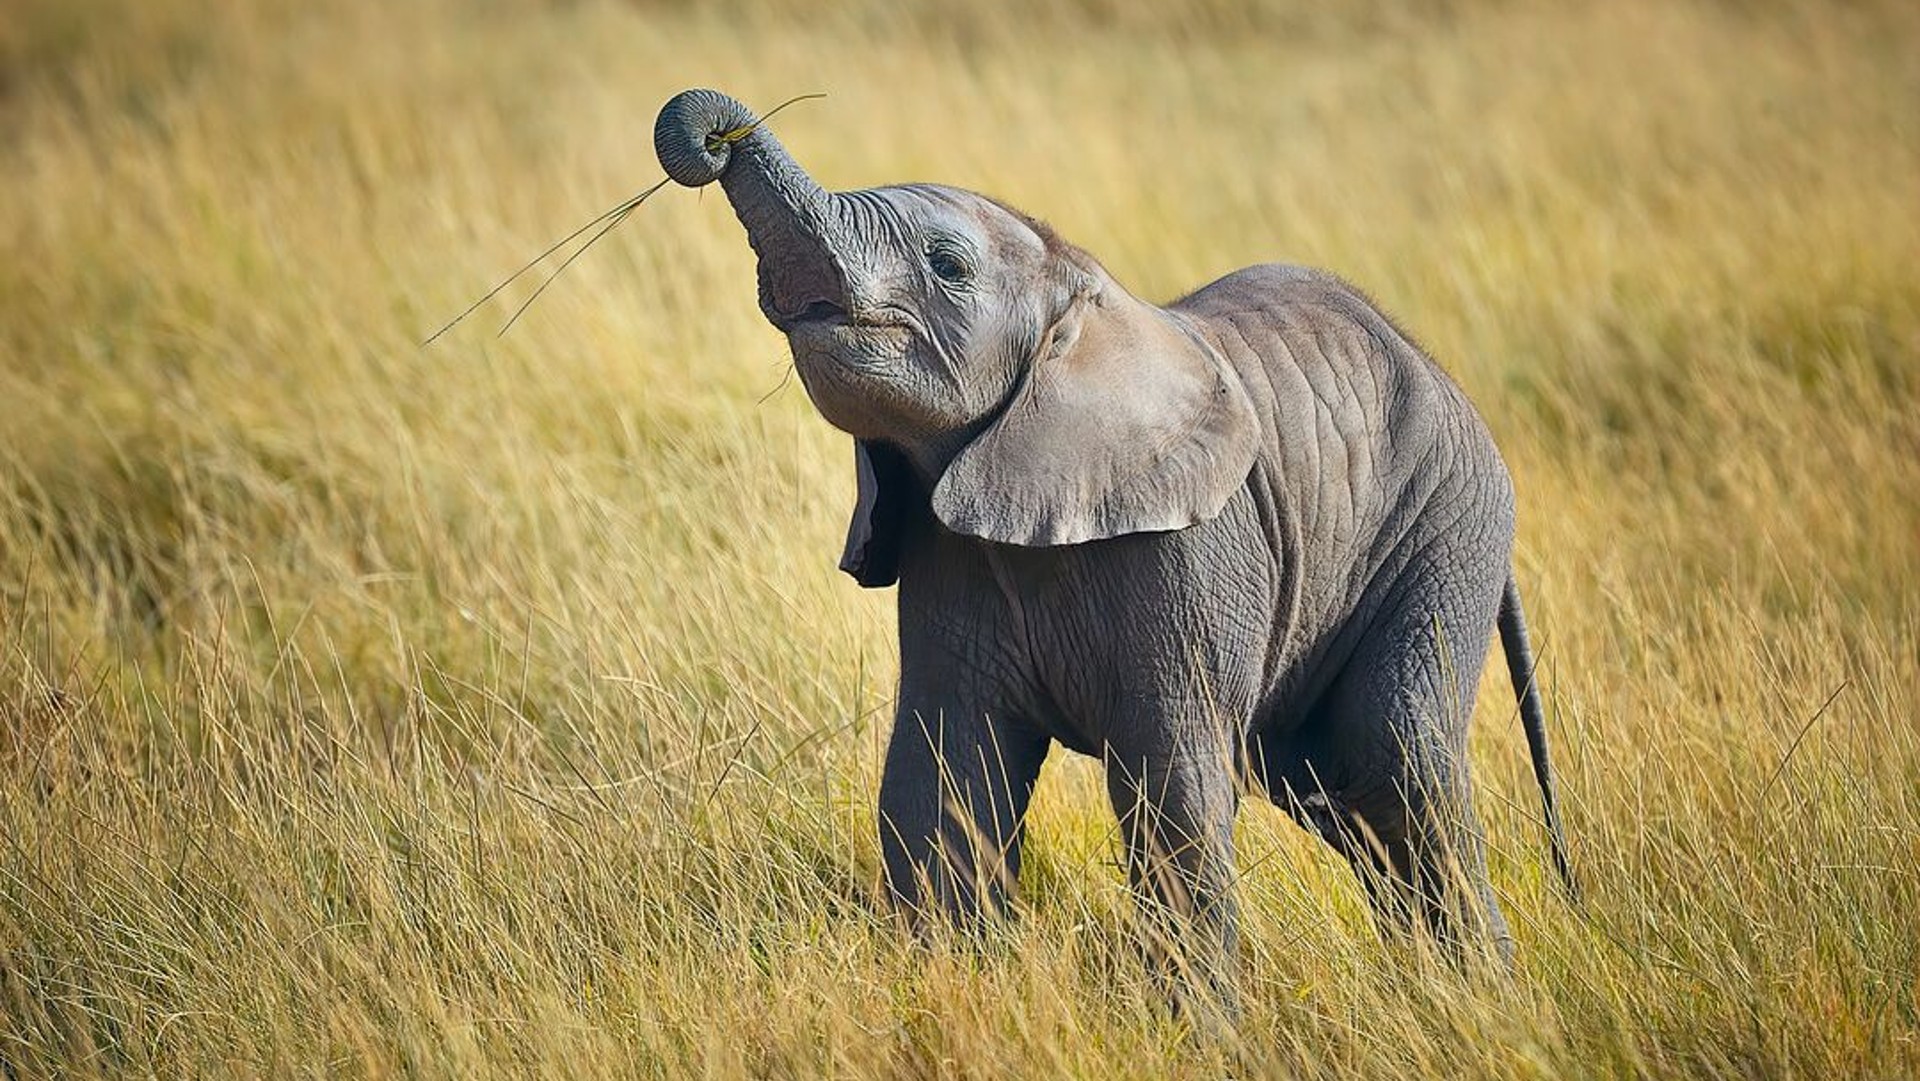 A baby elephant standing in long grass raising up its trunk which is holding a stick